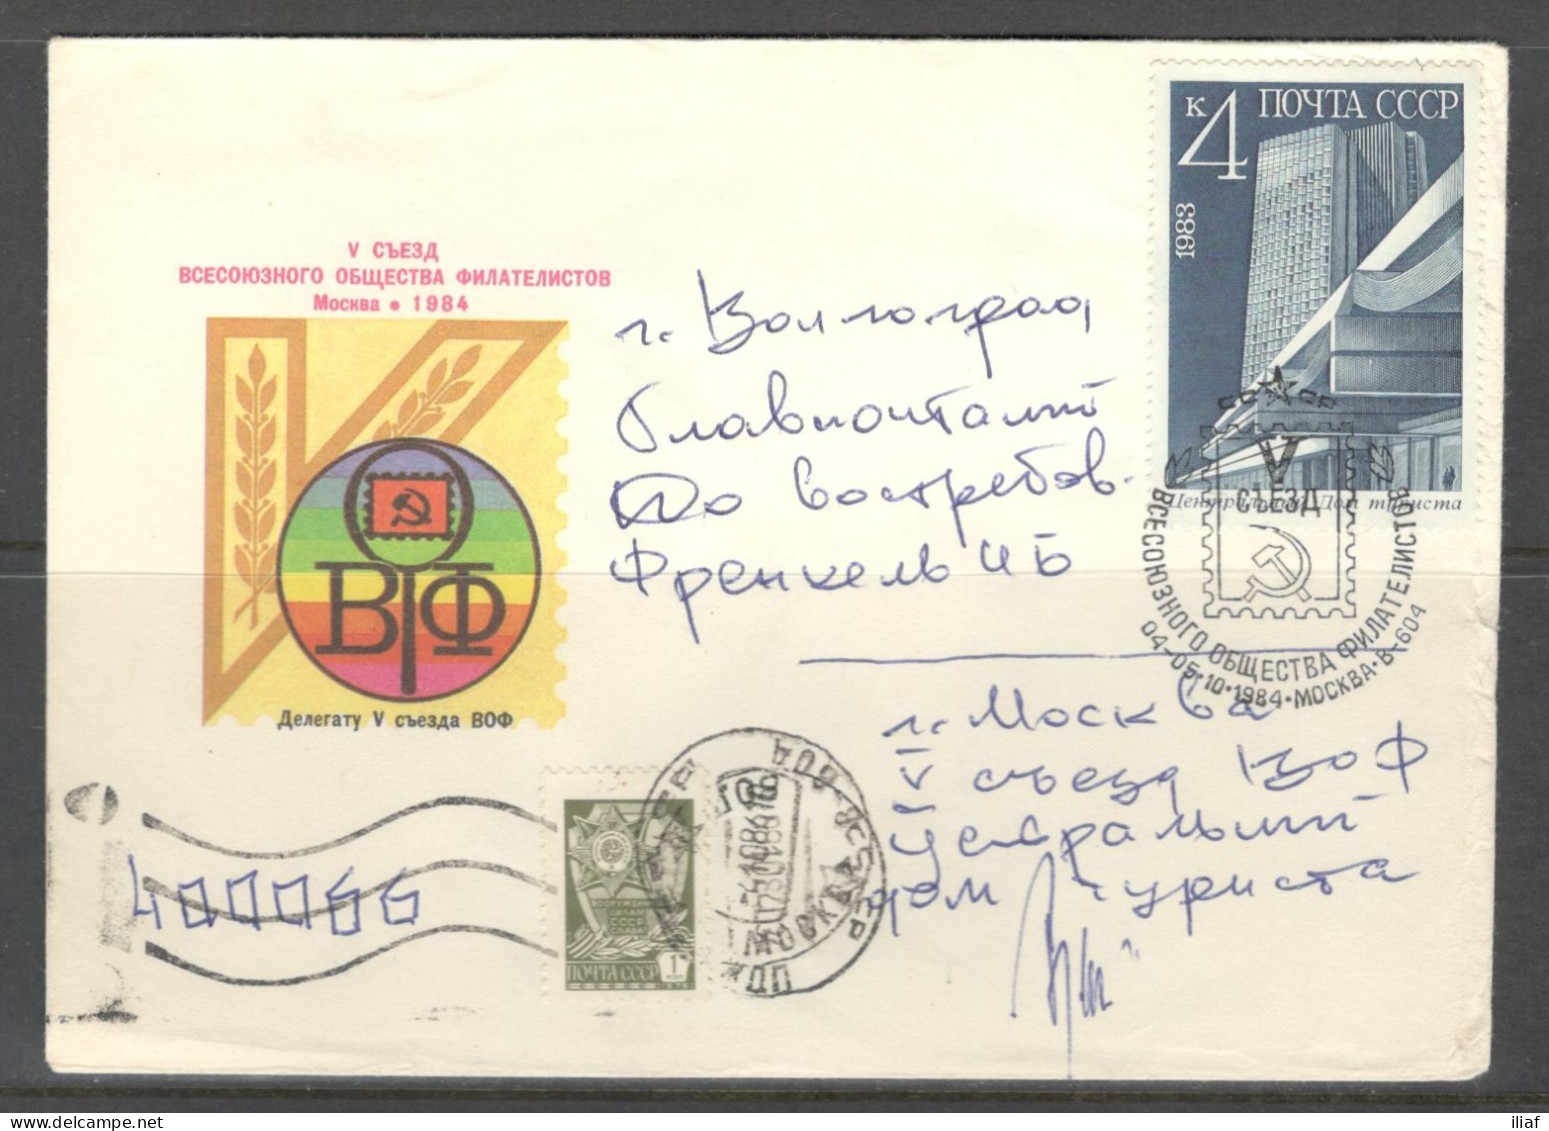 RUSSIA & USSR. 5th Congress Of The All-Union Society Of Philatelists. Special Envelope For Participants. - Journée Du Timbre